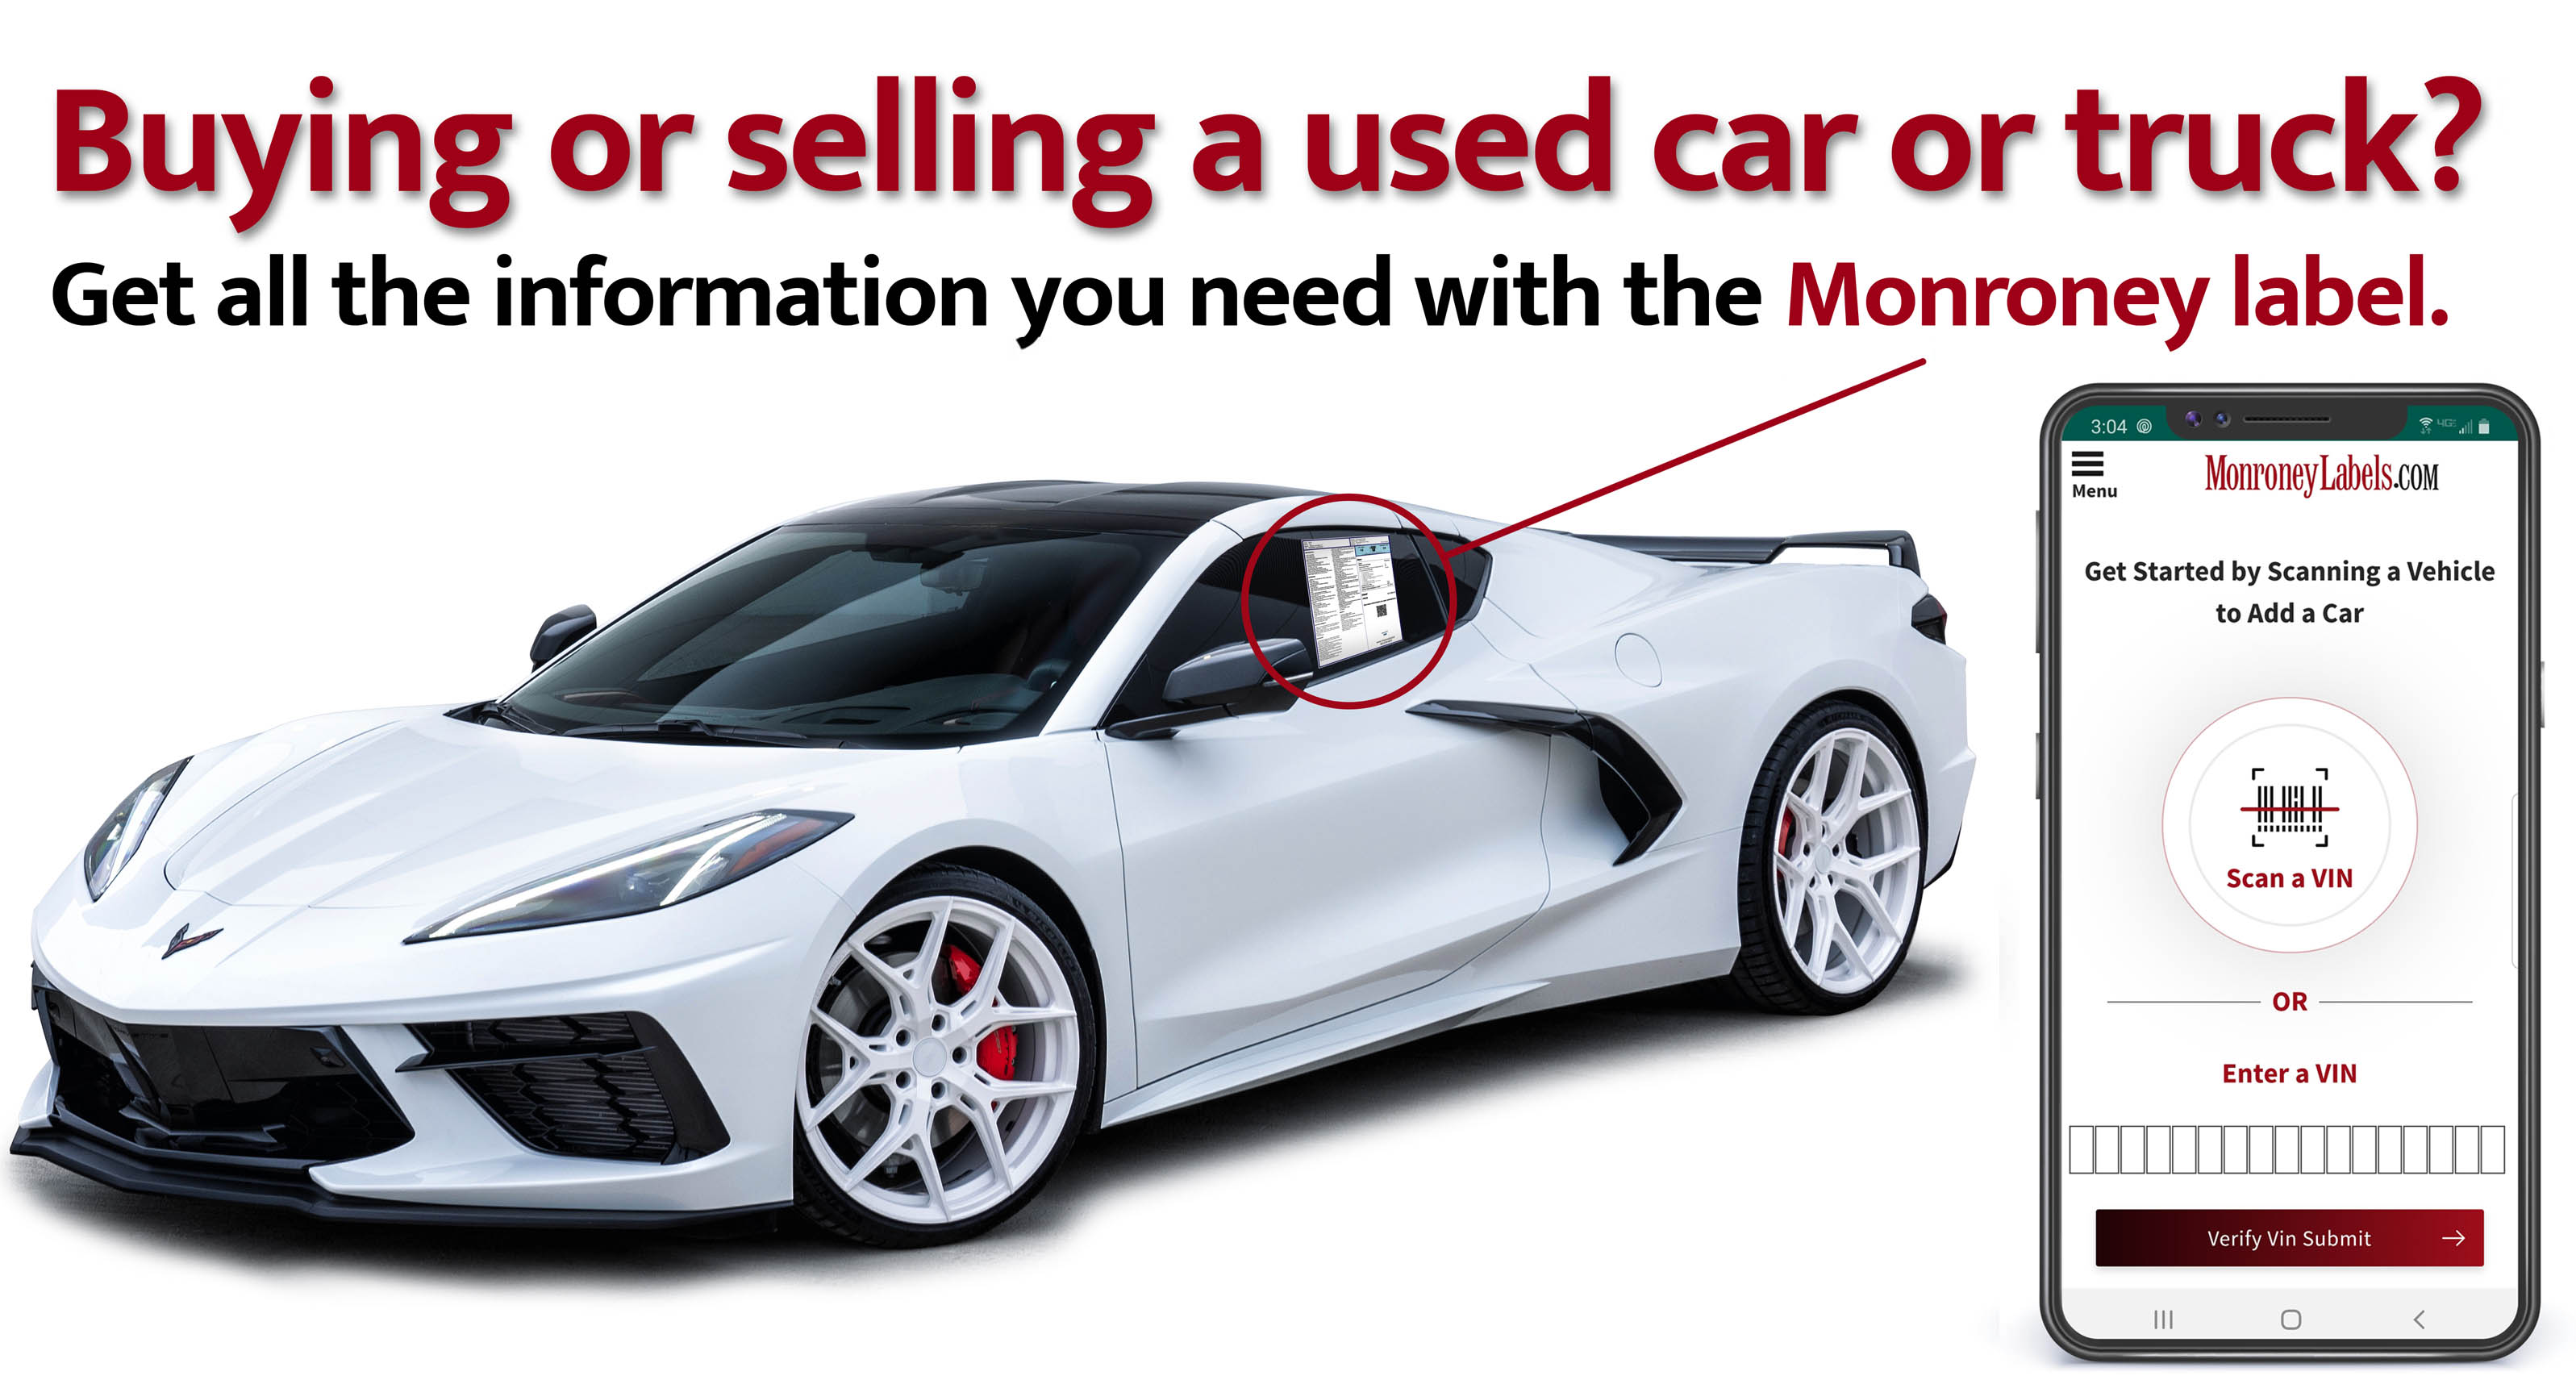 Get all the information you need with the Monroney label.